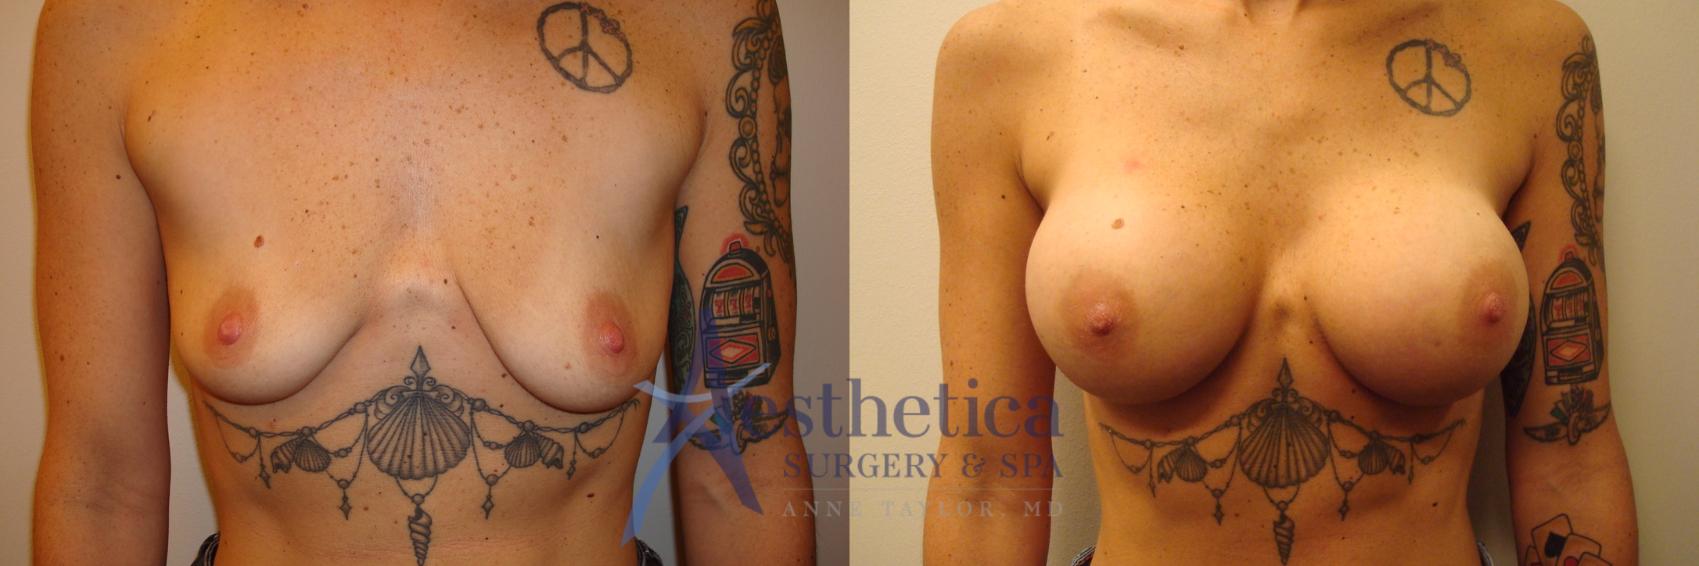 Breast Augmentation Case 376 Before & After View #1 | Worthington, OH | Aesthetica Surgery & Spa